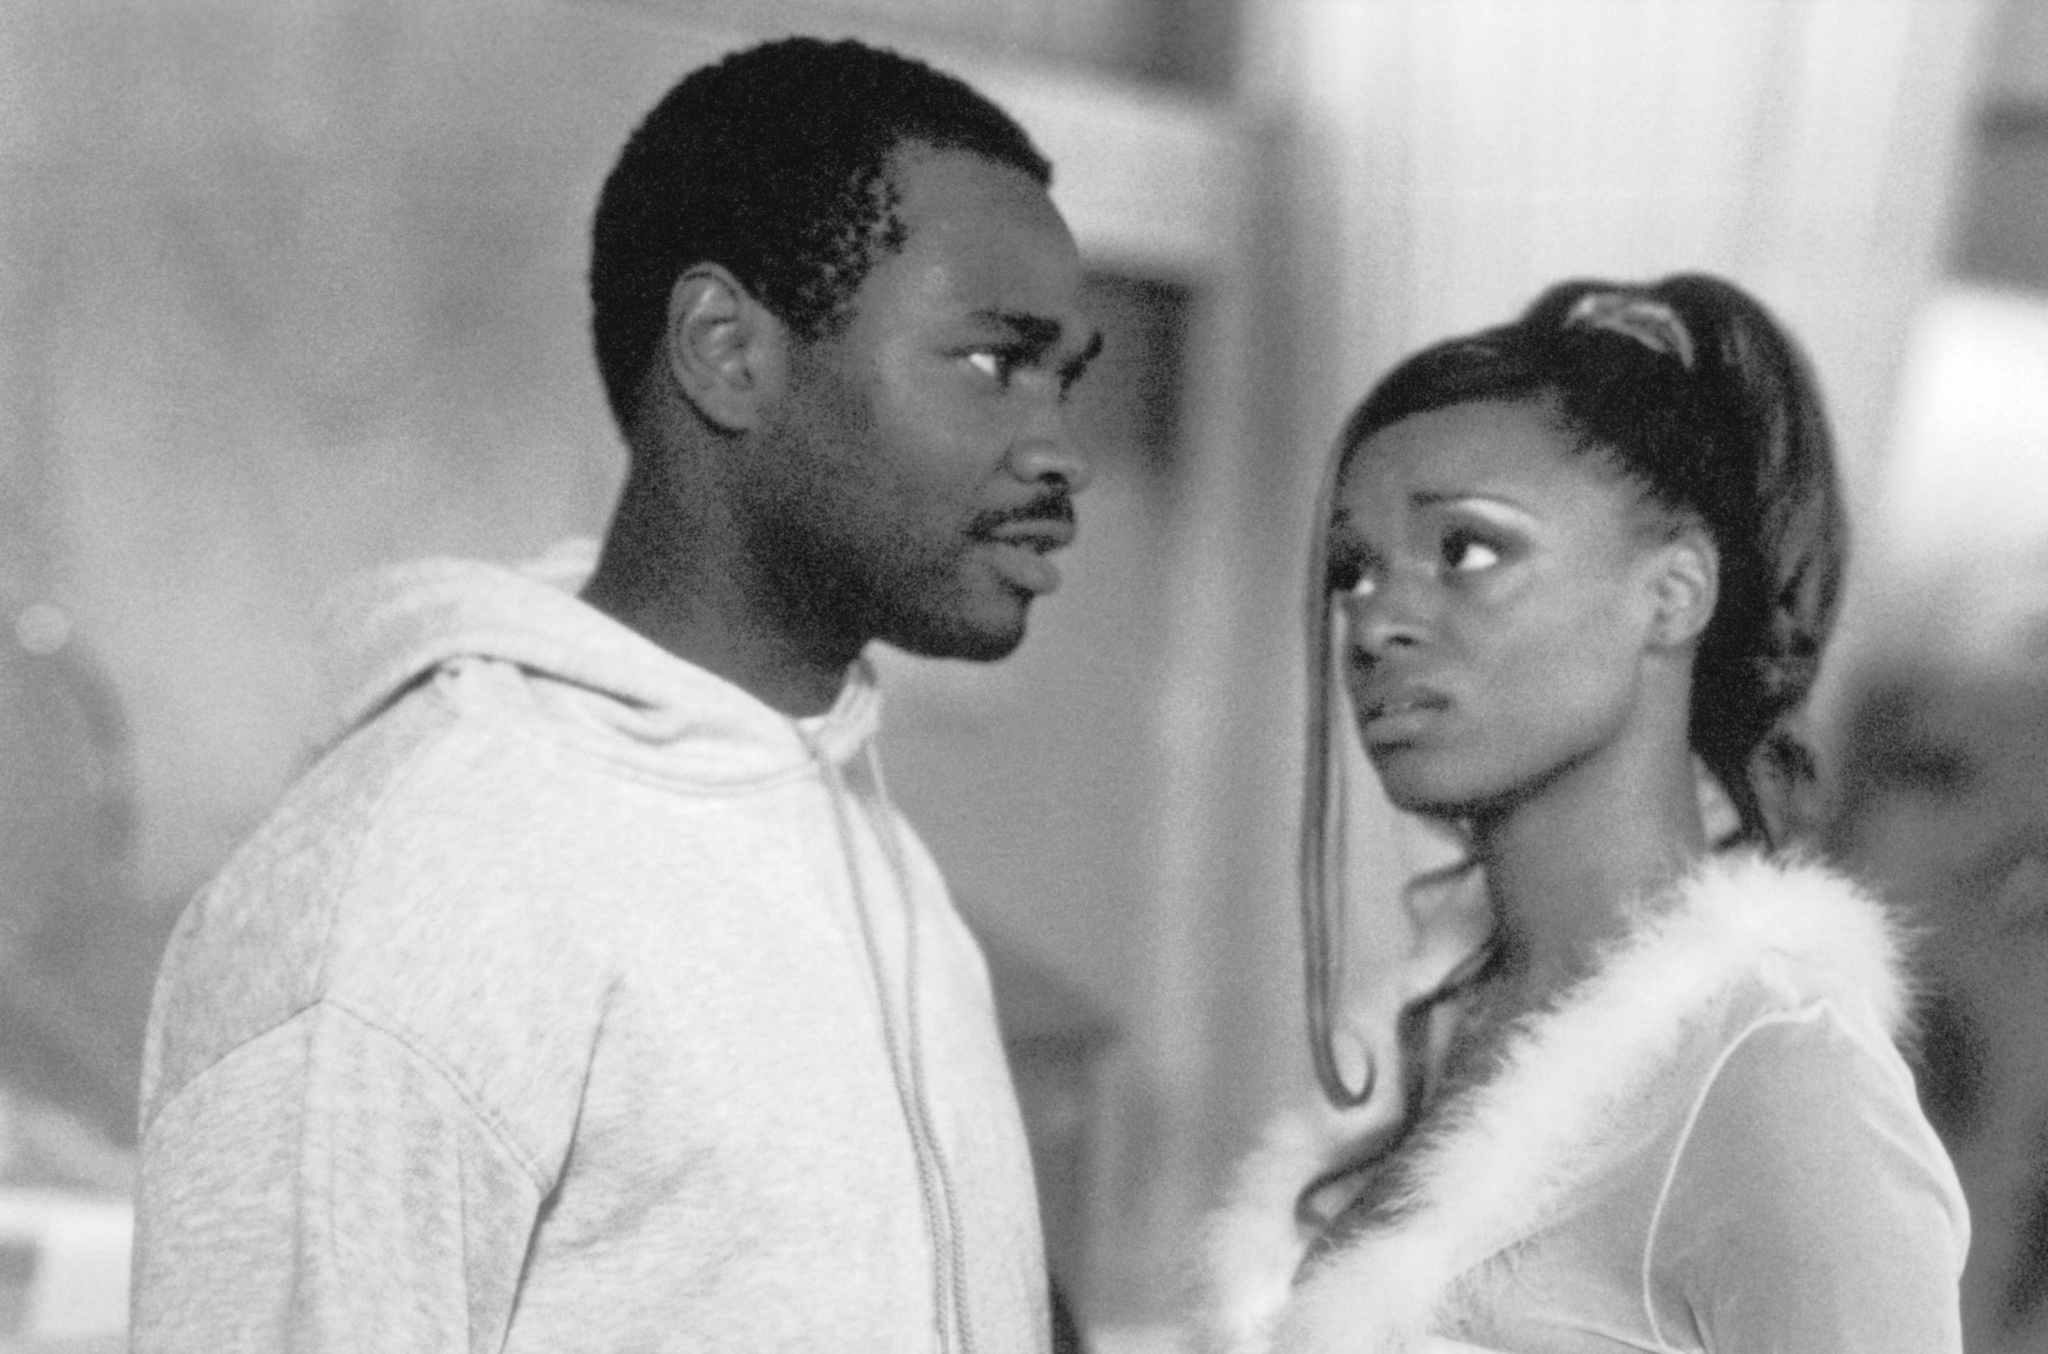 Still of Brian Hooks and N'Bushe Wright in 3 Strikes (2000)